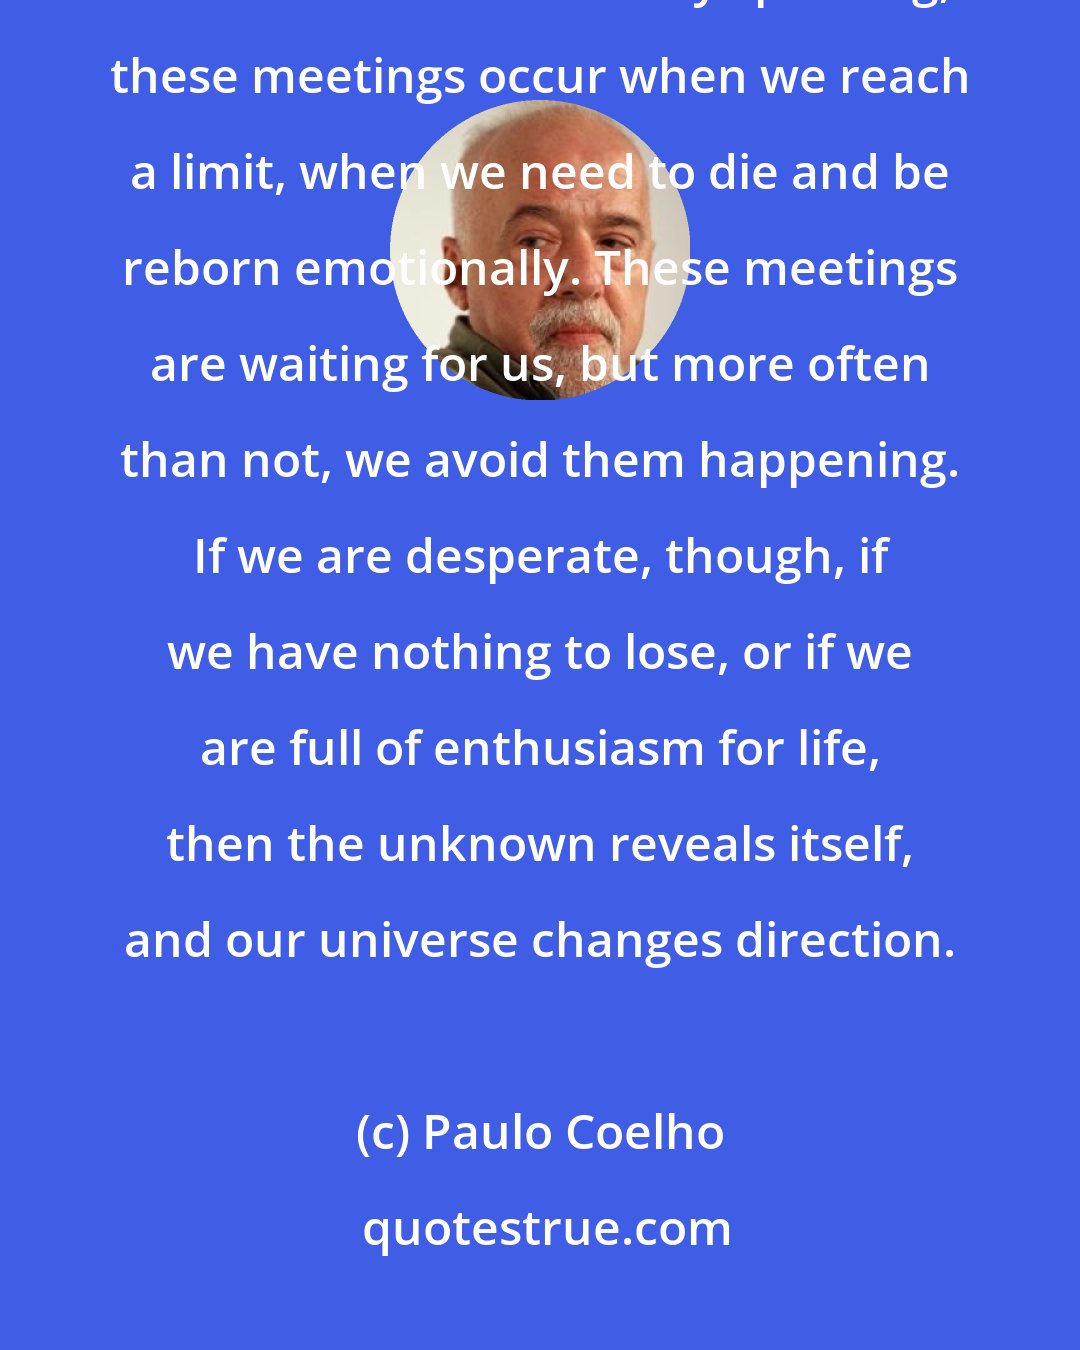 Paulo Coelho: Really important meetings are planned by the souls long before the bodies see each other. Generally speaking, these meetings occur when we reach a limit, when we need to die and be reborn emotionally. These meetings are waiting for us, but more often than not, we avoid them happening. If we are desperate, though, if we have nothing to lose, or if we are full of enthusiasm for life, then the unknown reveals itself, and our universe changes direction.